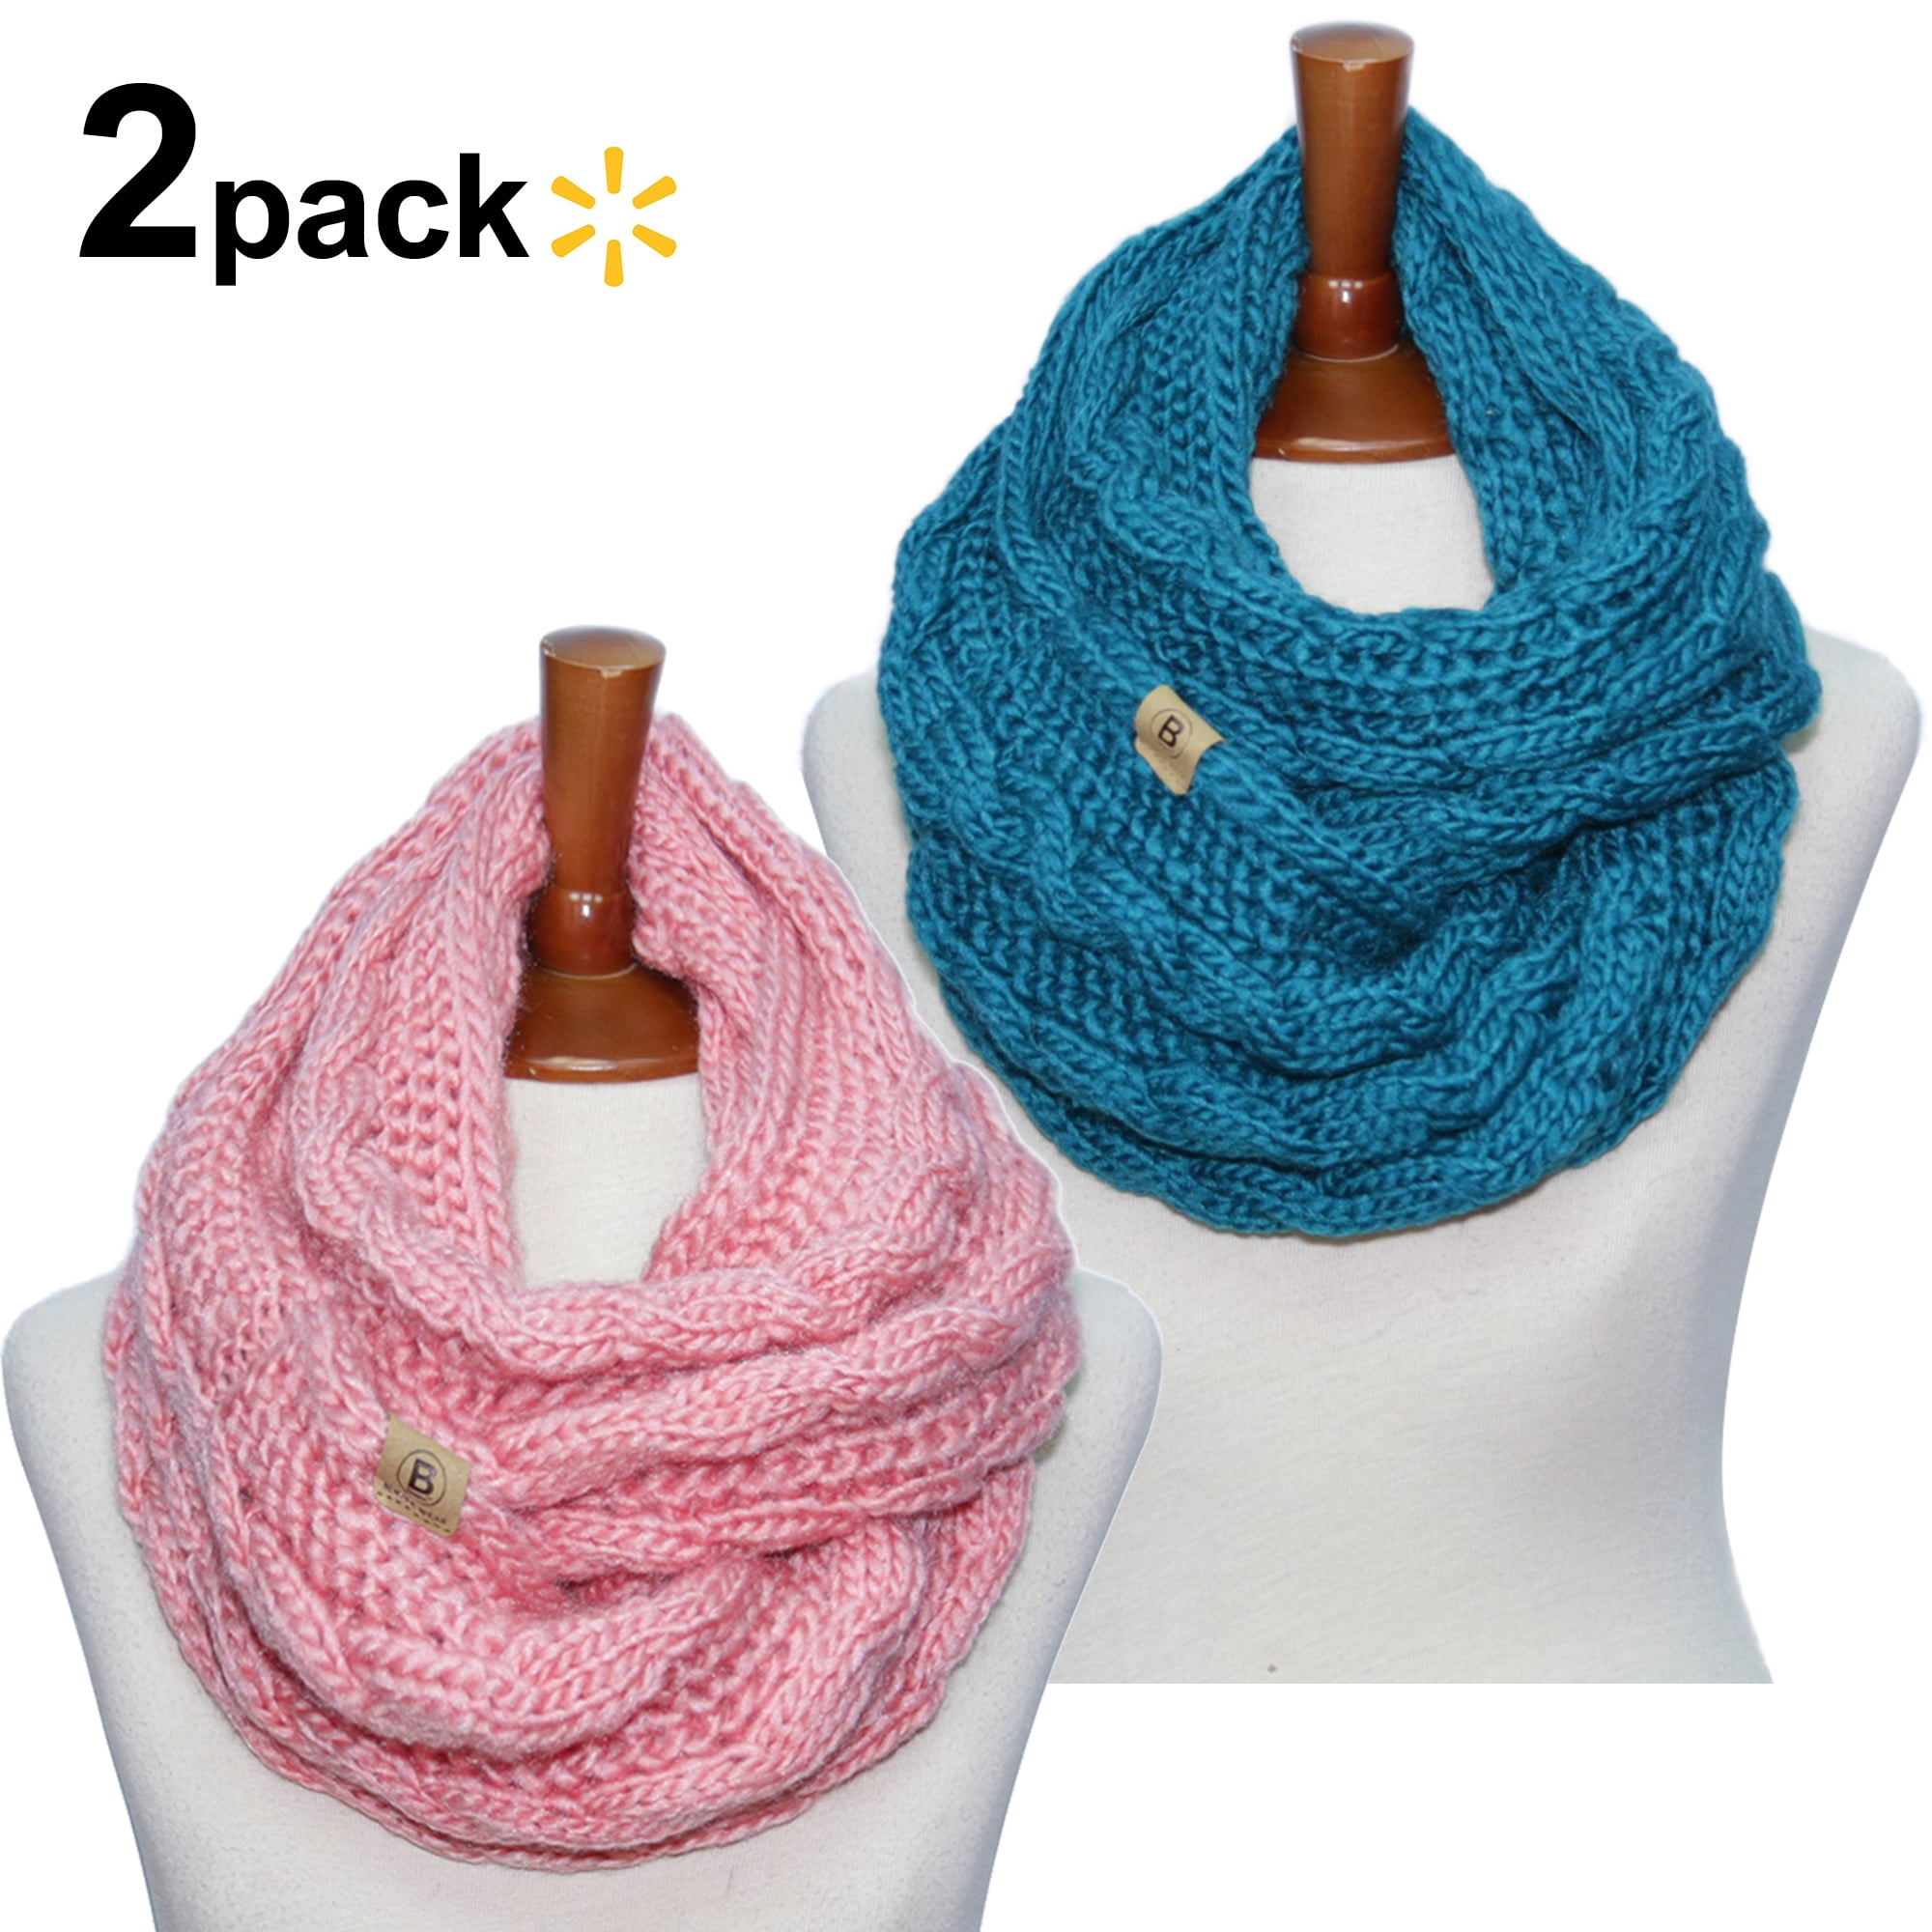 Chunky knit wool infinity scarf and mittens set women pink winter matching cowl infinty scarf snood neckwarmer mittens combo infinity loop